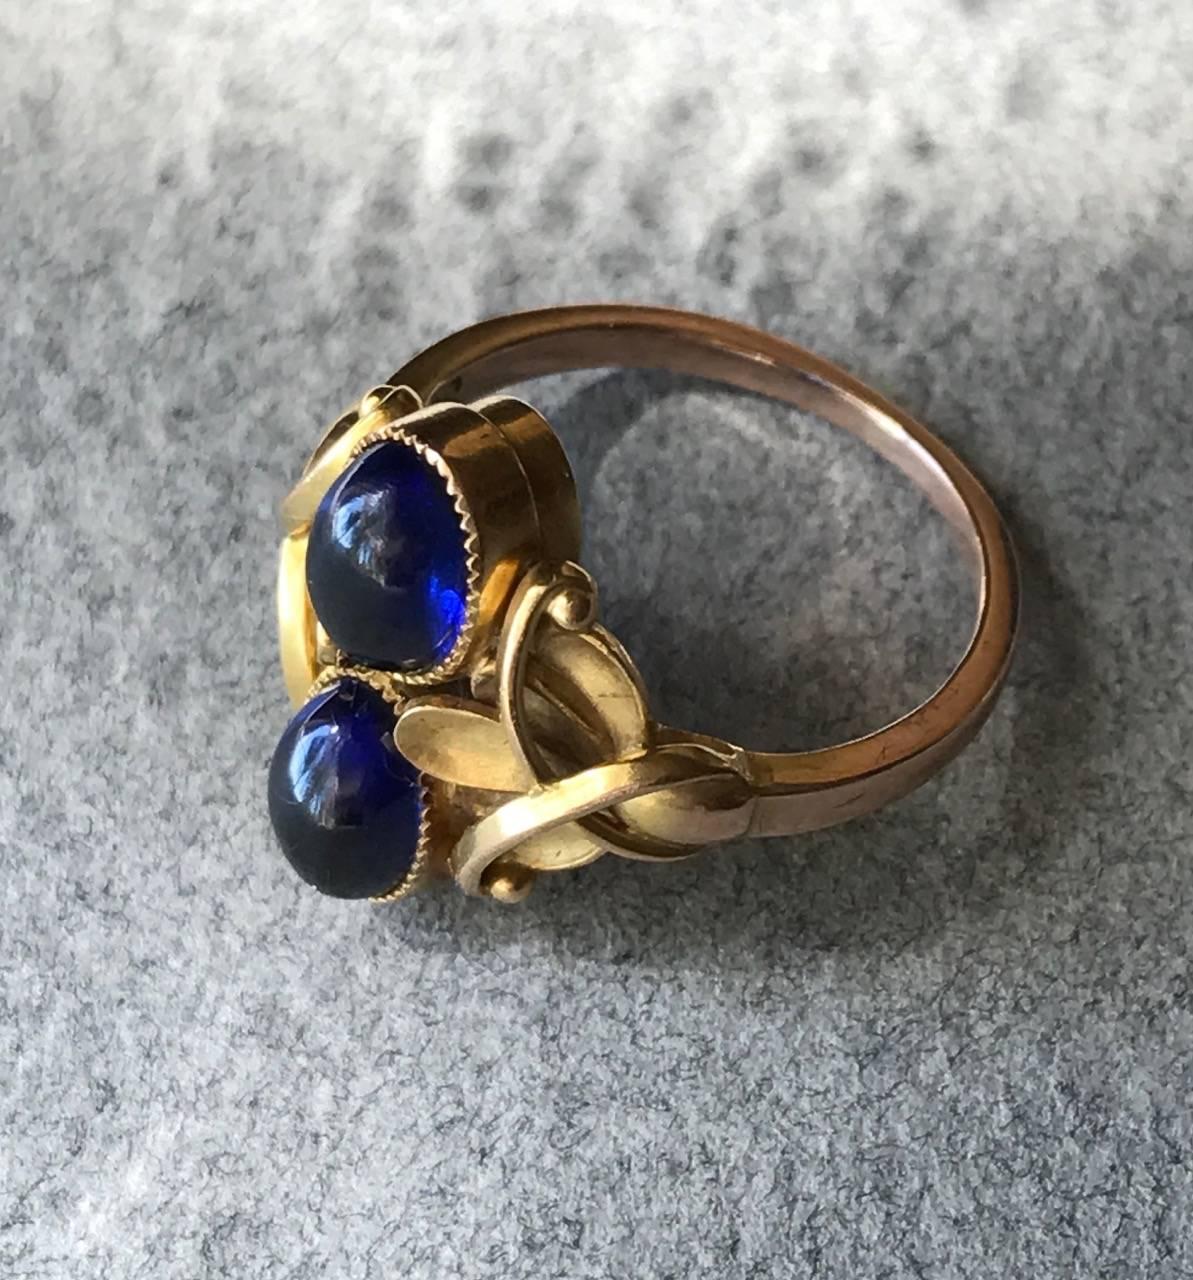 Georg Jensen 14Kt Gold Ring With Vibrant Blue Sapphire Cabochons.

Design No. 330A Very Rare. Designed by Henry Pilstrup. 

Early Hallmarks from 1933-44. 

Jensen made this design in Sterling but in a larger scale.

Perfect for a petite finger. 